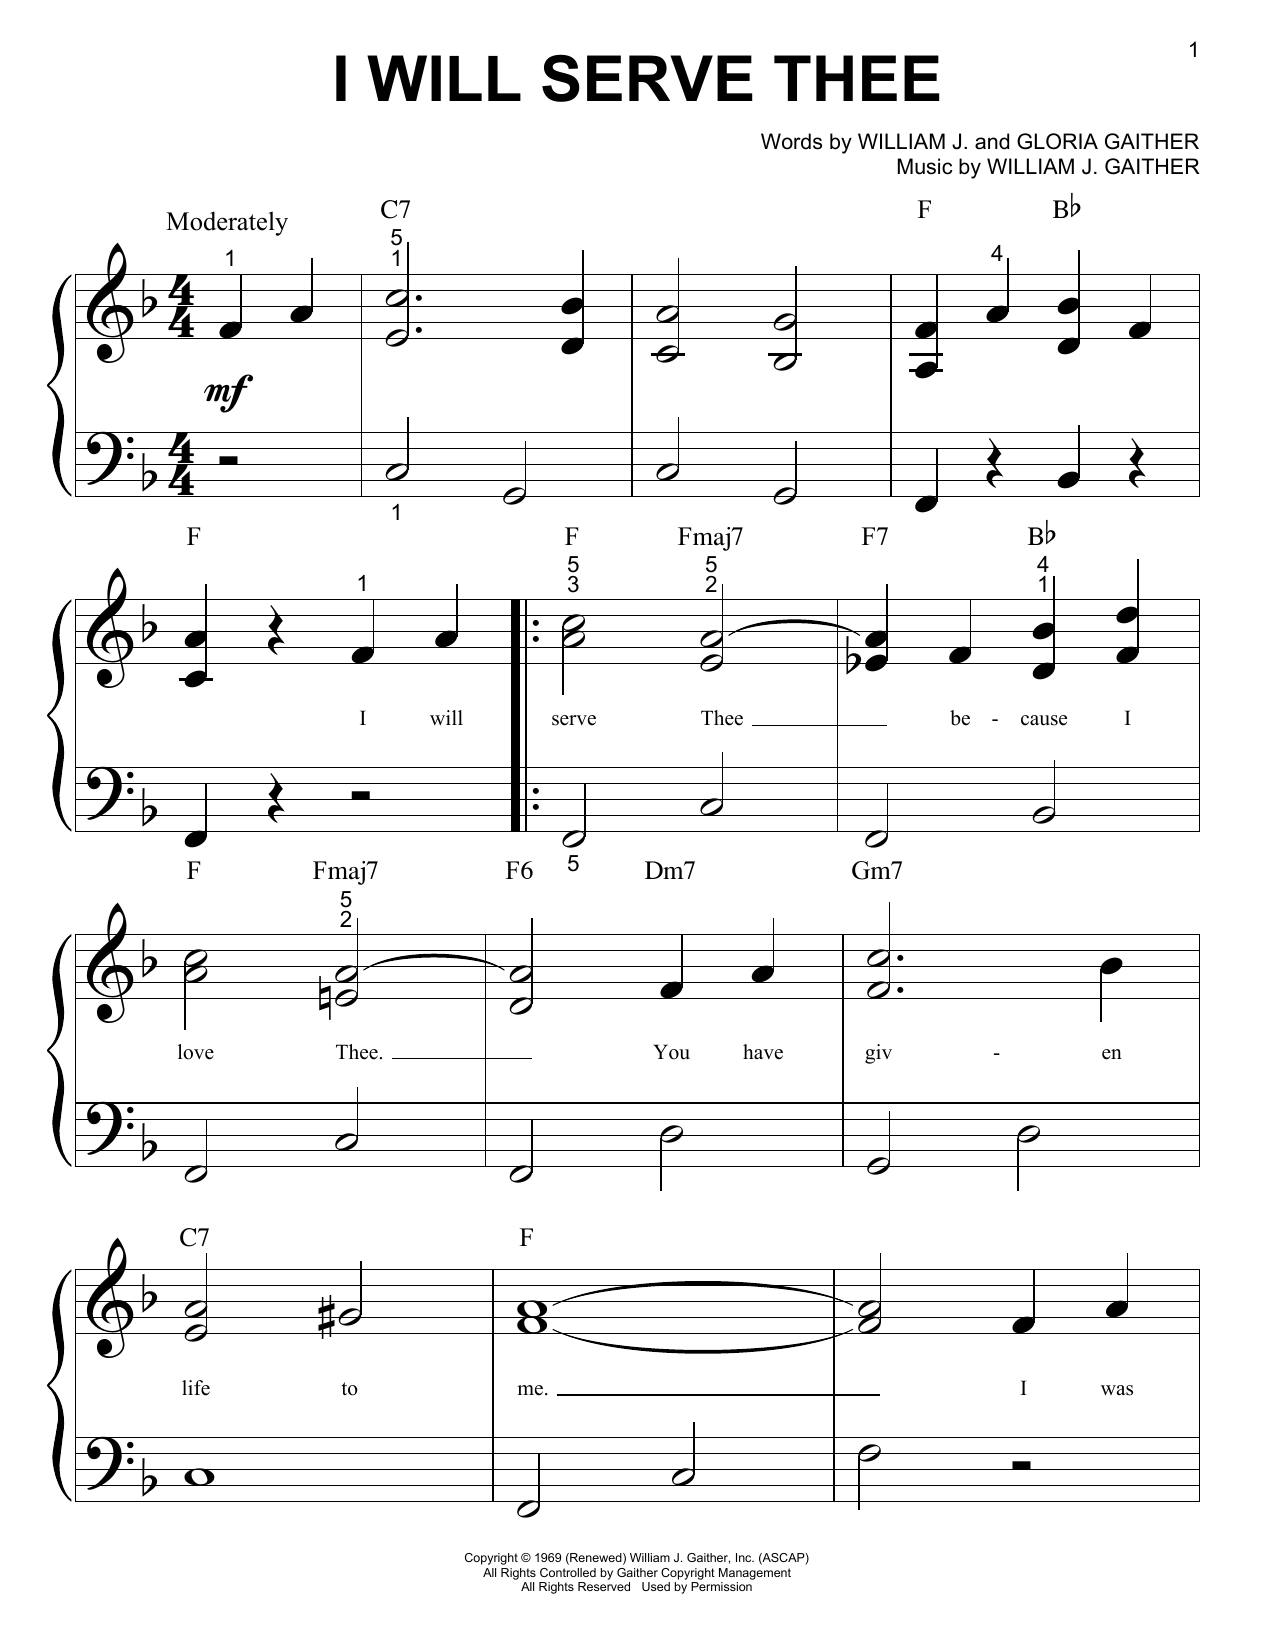 Download Bill & Gloria Gaither I Will Serve Thee Sheet Music